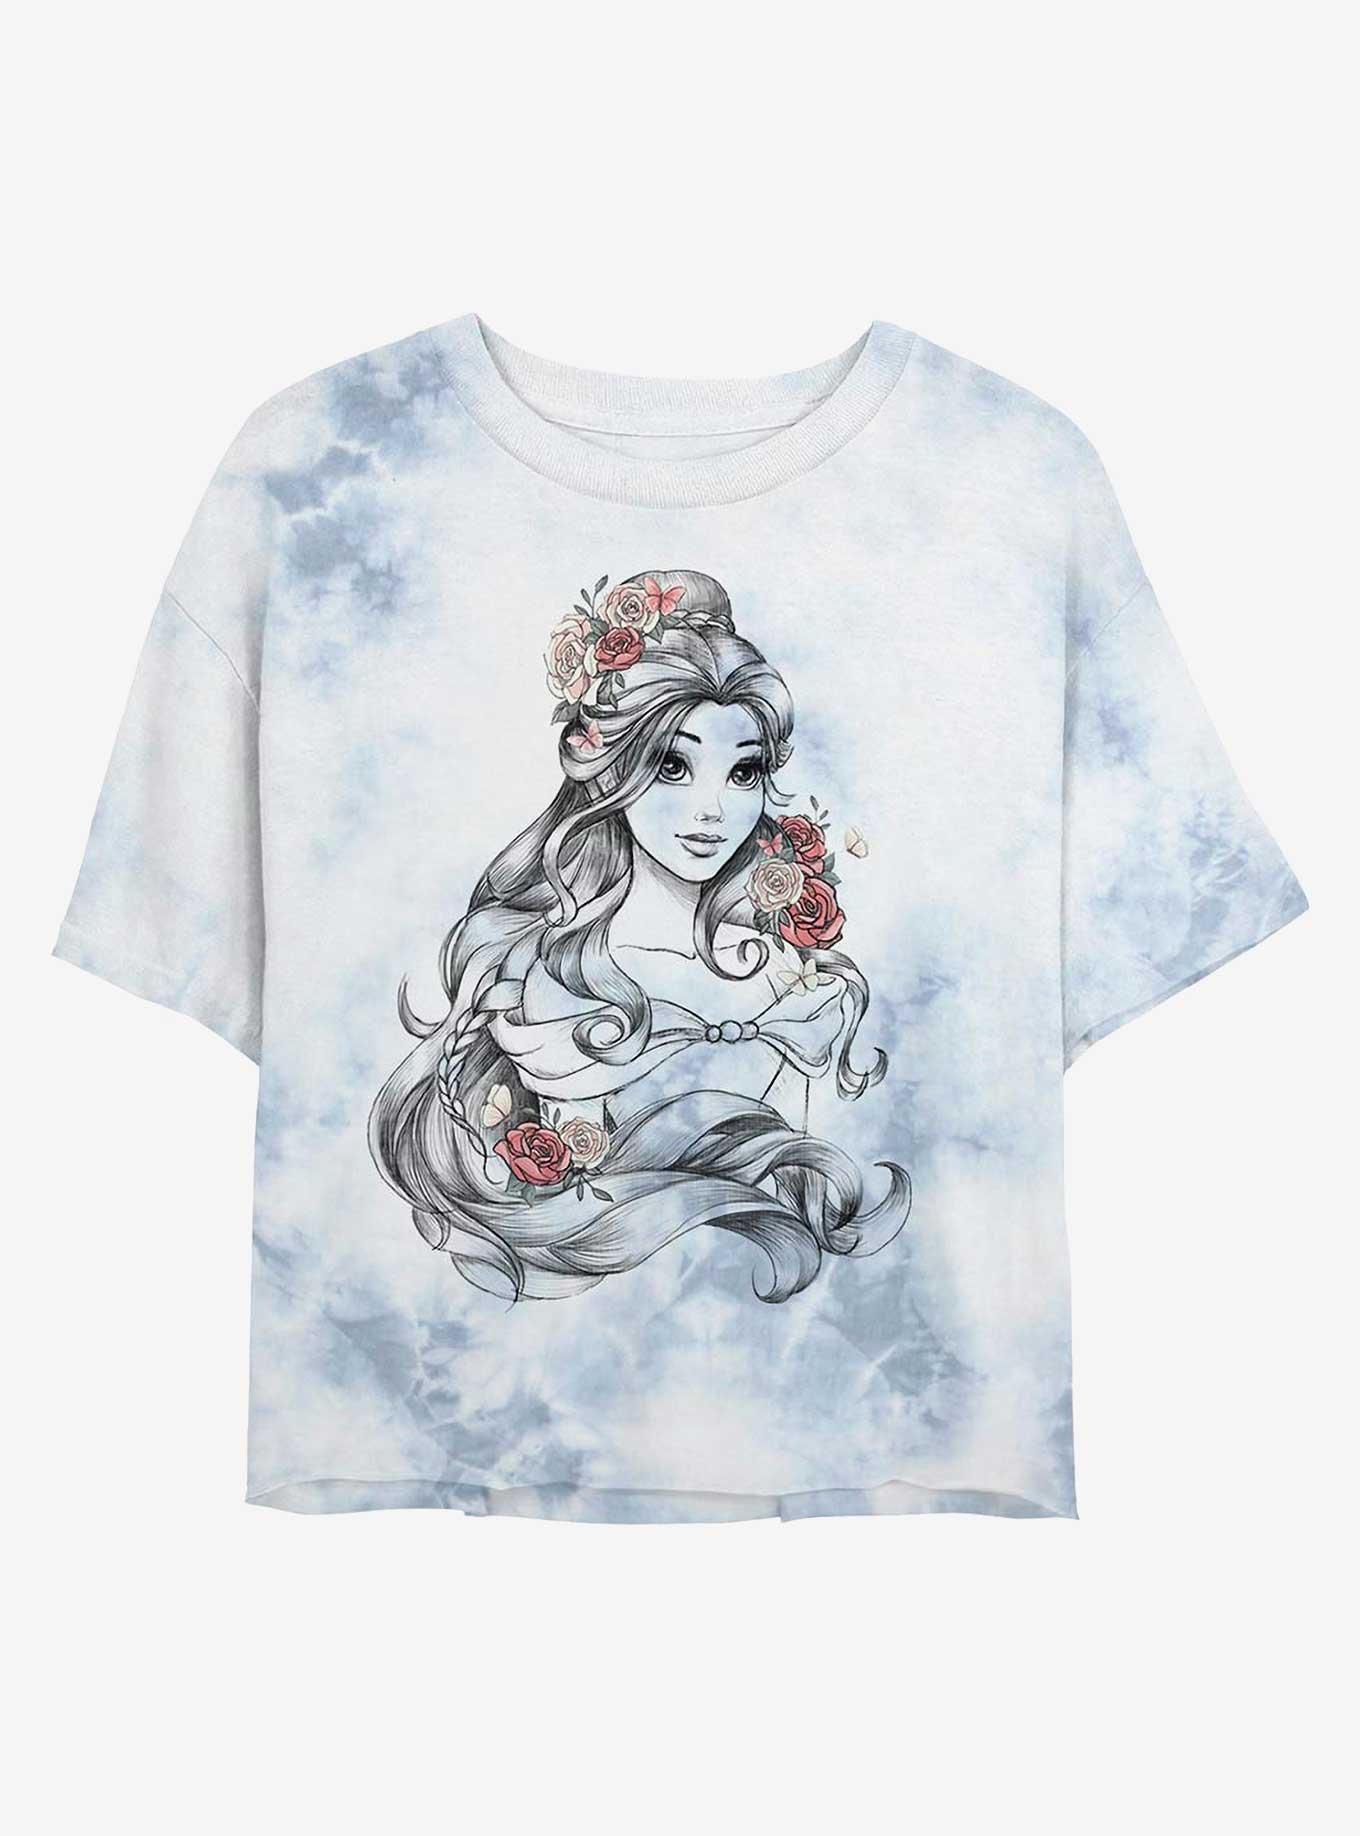 Disney Beauty and the Beast Belle of the Ball Tie-Dye Girls Crop T-Shirt, WHITEBLUE, hi-res